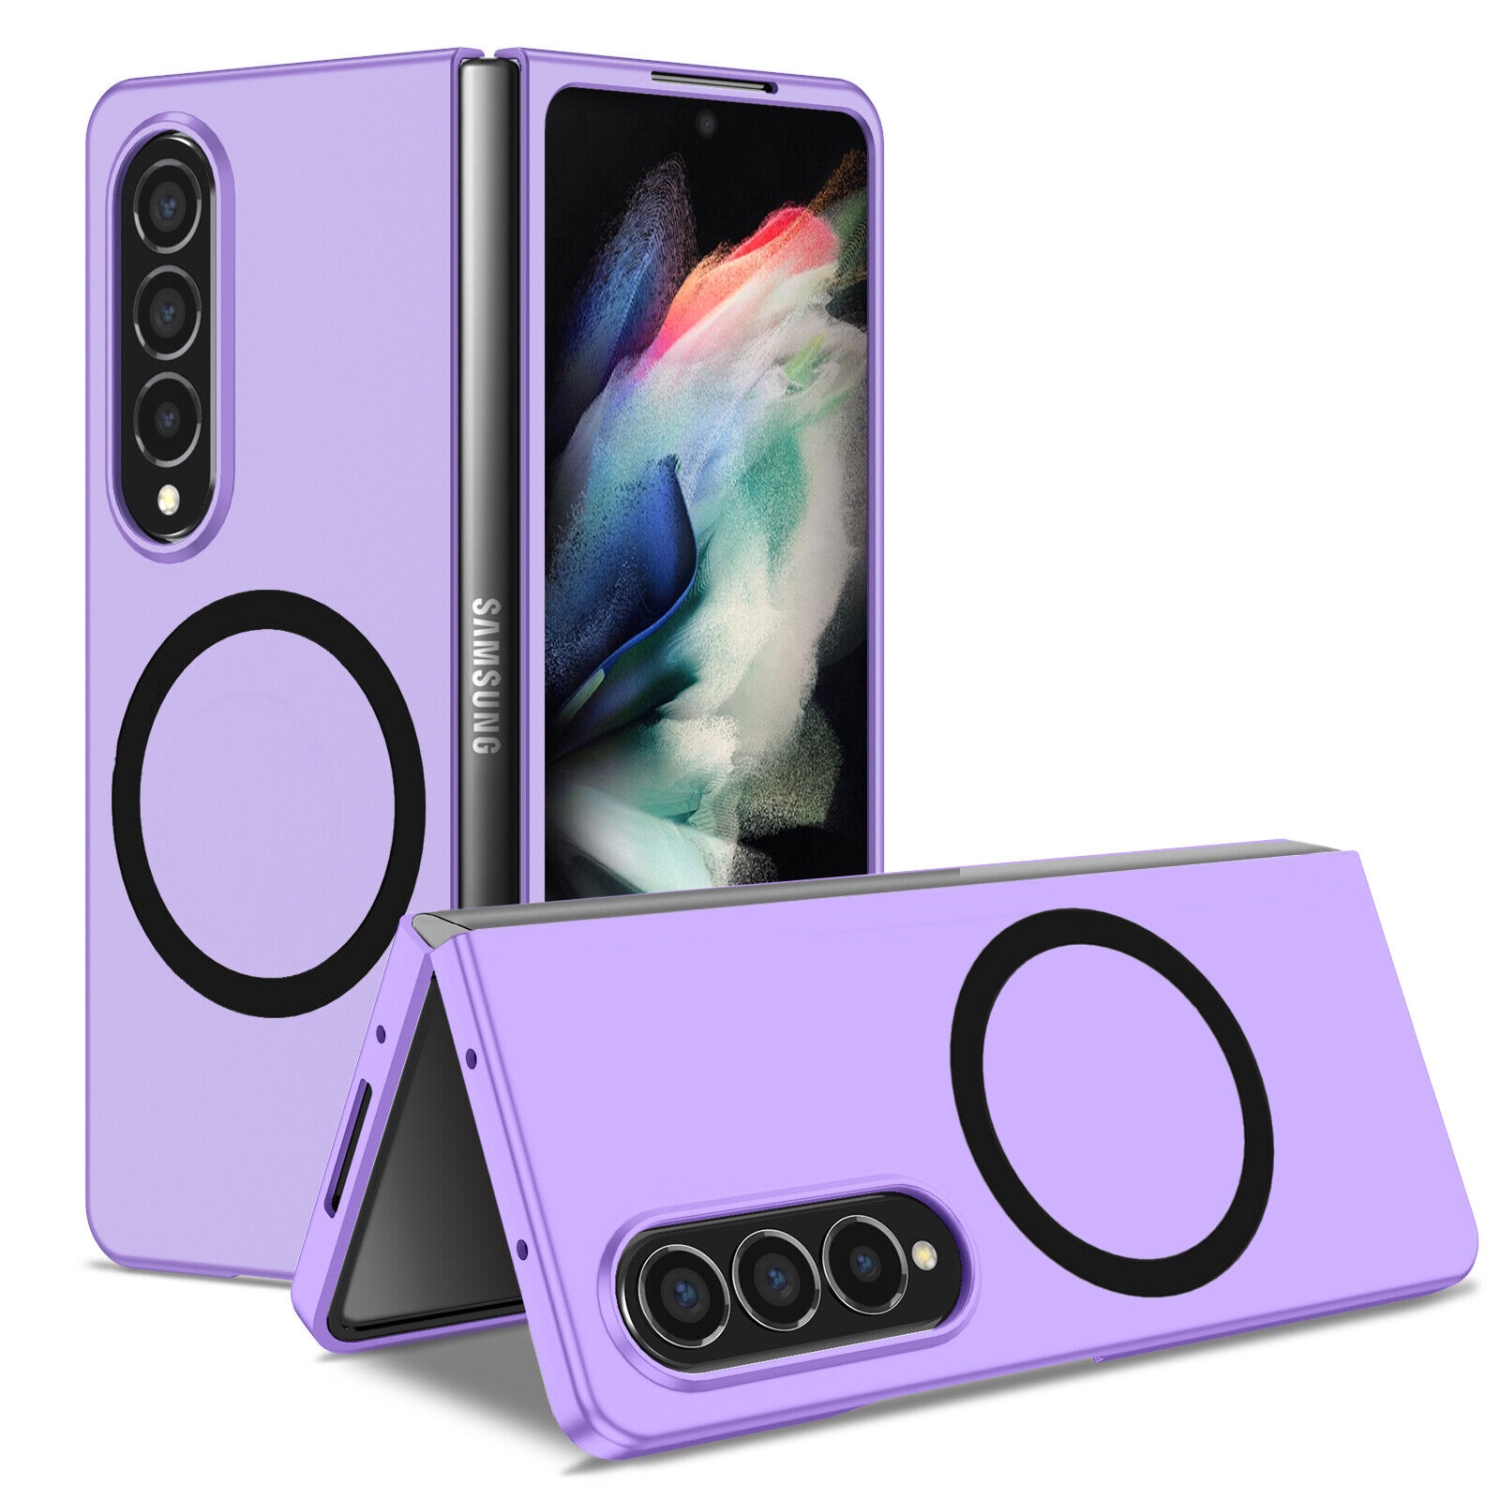 【CSmart】 Hybrid Magnetic Wireless Charging MagSafe Case Back Cover for Samsung Galaxy Z Fold 3, Purple